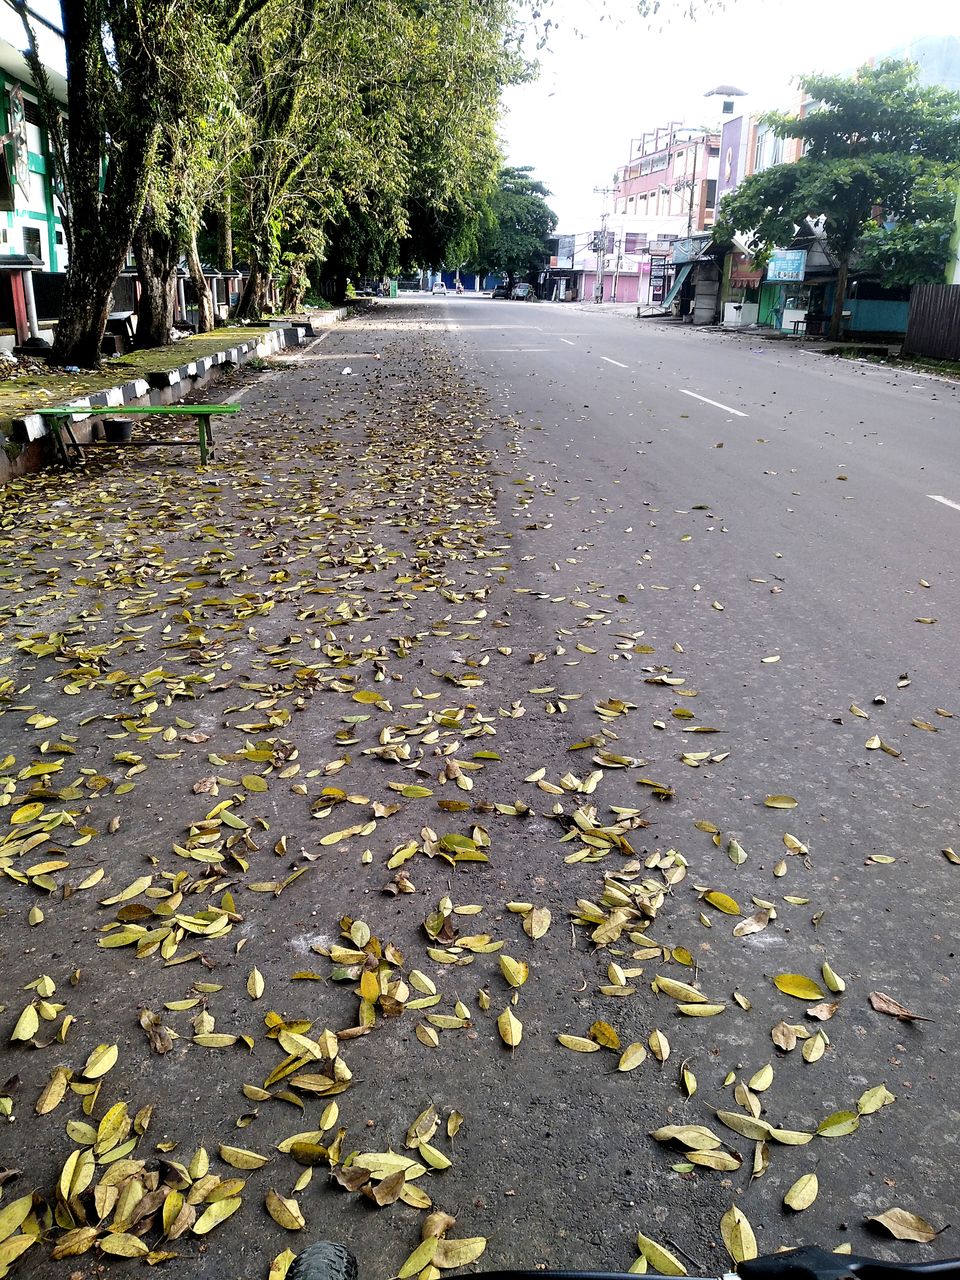 leaf, plant part, city, tree, autumn, street, plant, nature, transportation, road surface, lane, day, road, the way forward, architecture, leaves, falling, asphalt, no people, outdoors, building exterior, footpath, infrastructure, built structure, diminishing perspective, car, mode of transportation, dry, motor vehicle, sidewalk